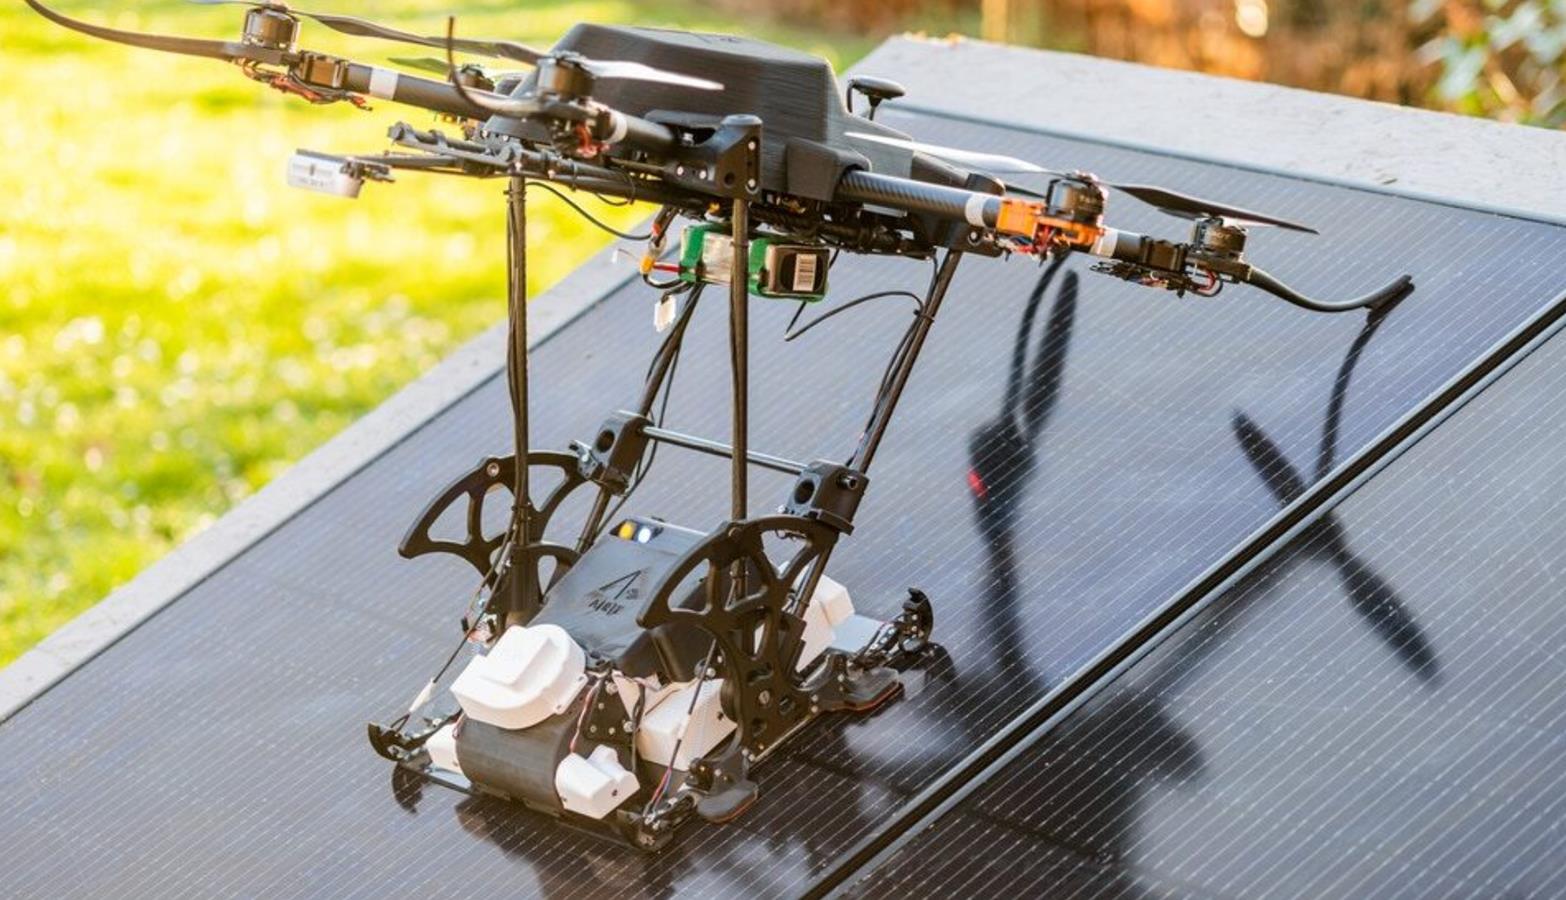 An automated solar panel cleaning system uses drones